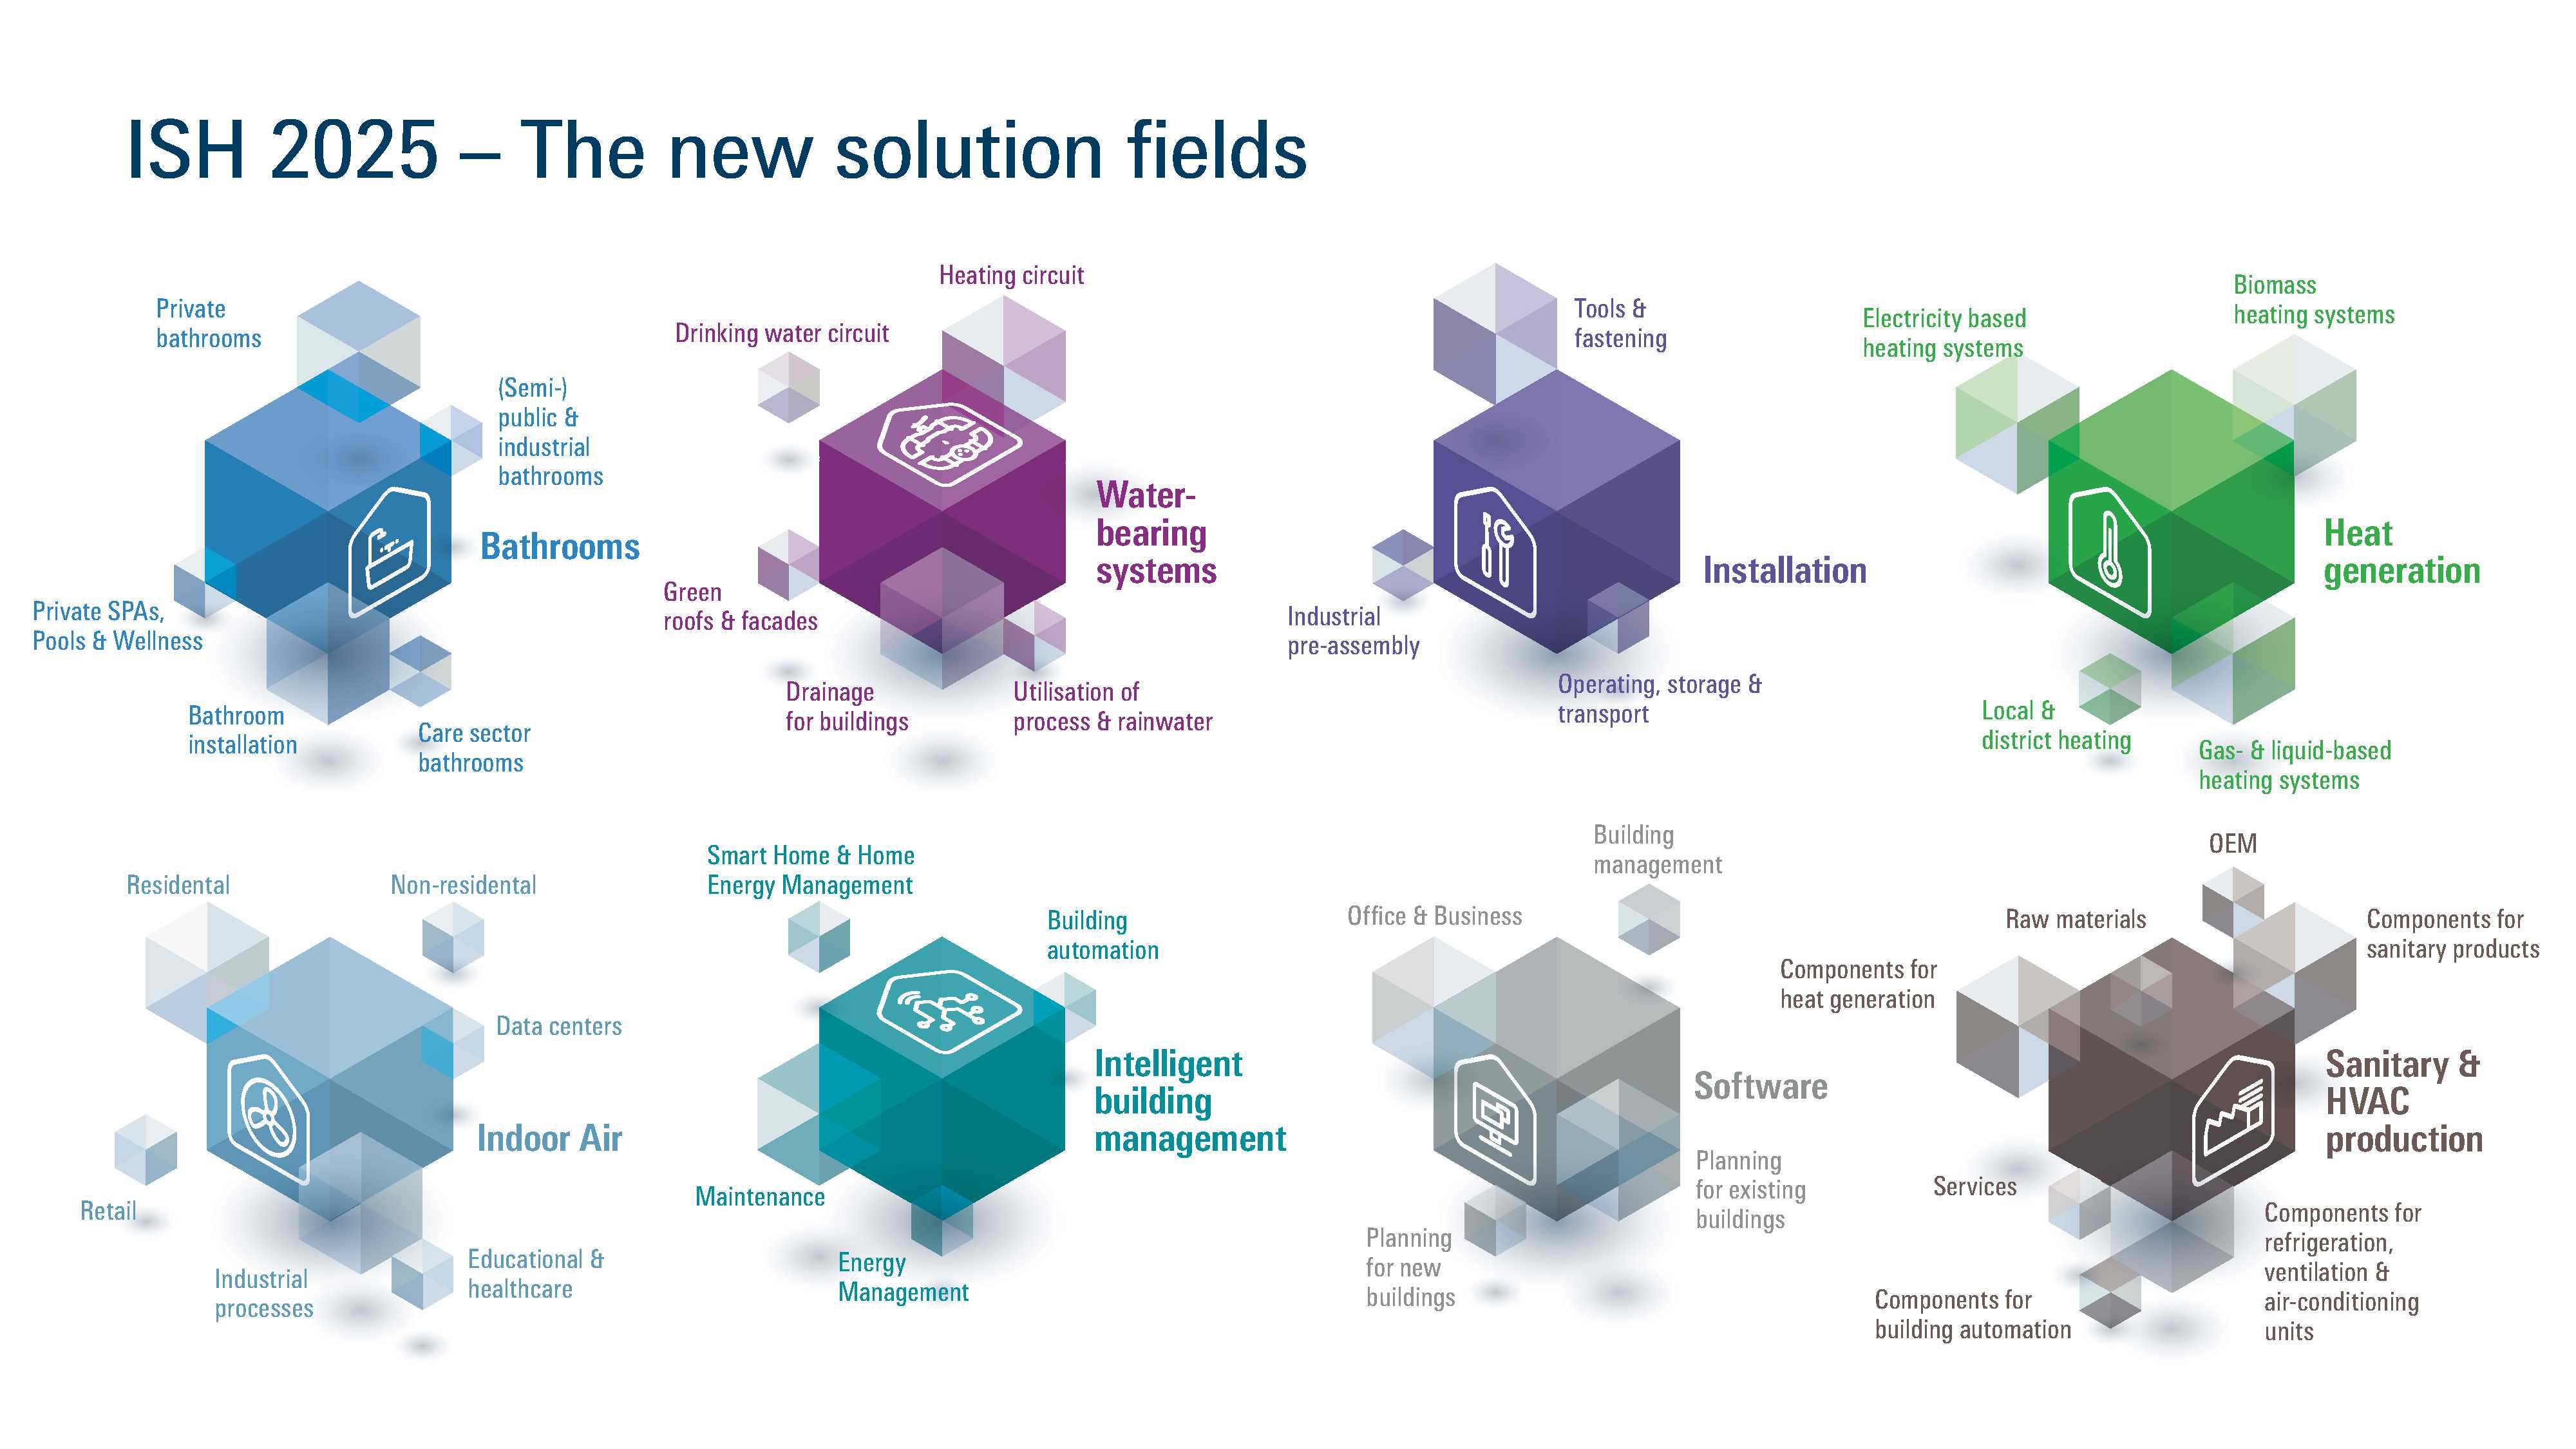 Growing expectations and greater individuality in all fields of energy efficient and resource friendly building-services technology lead to eight new solution fields for ISH 2025.